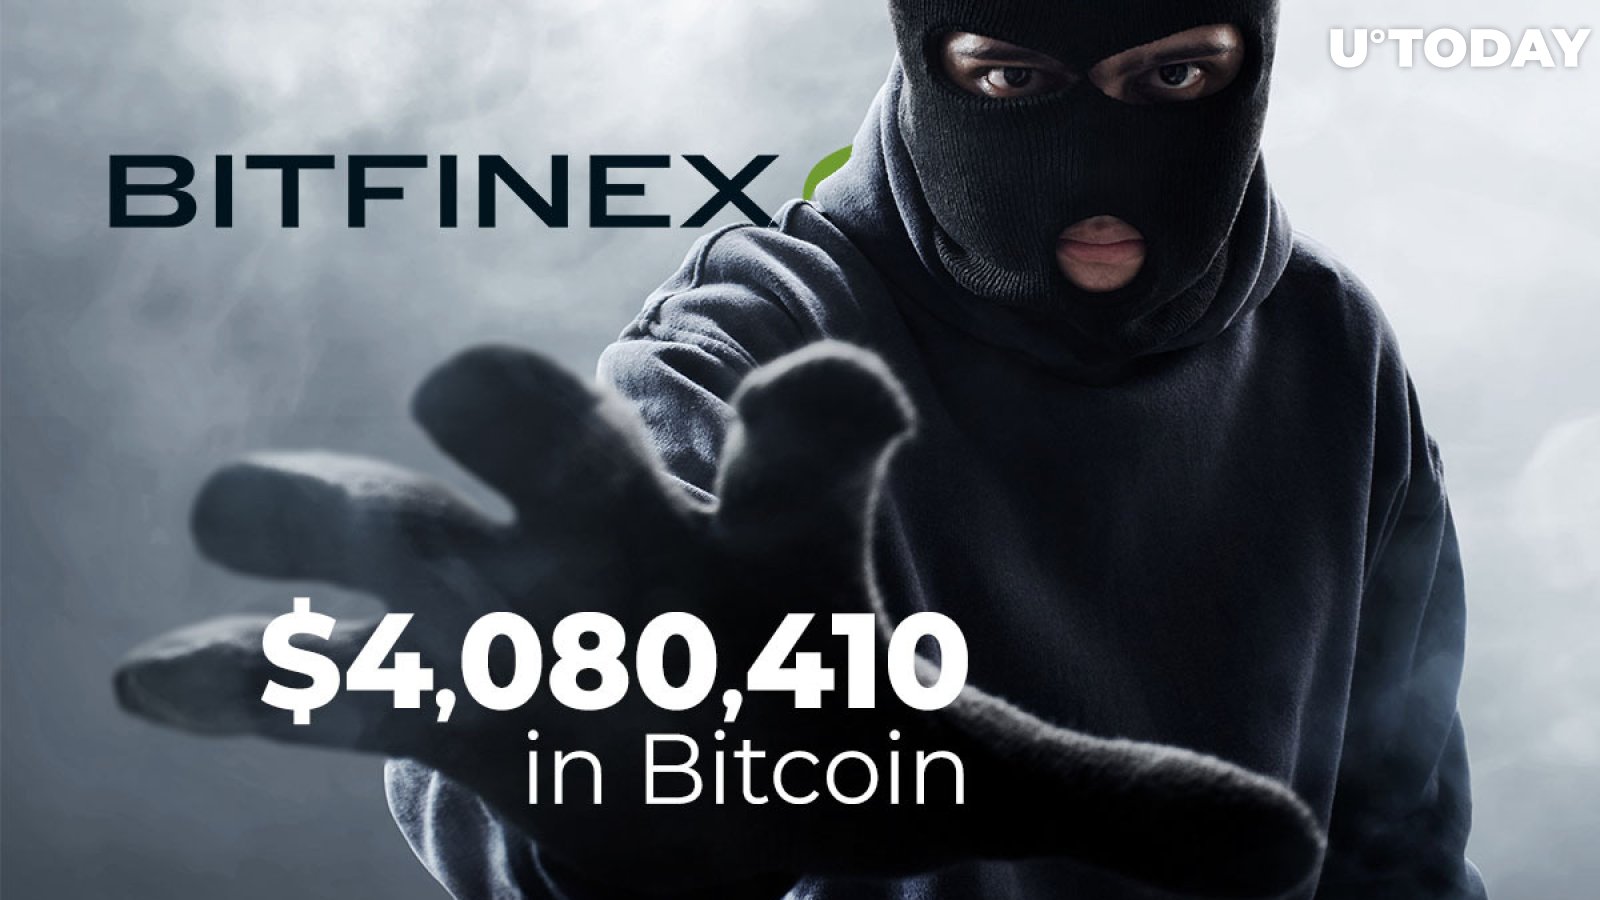 Hackers Transfer $4,080,410 in Bitcoin from Funds Stolen from Bitfinex in 2016 